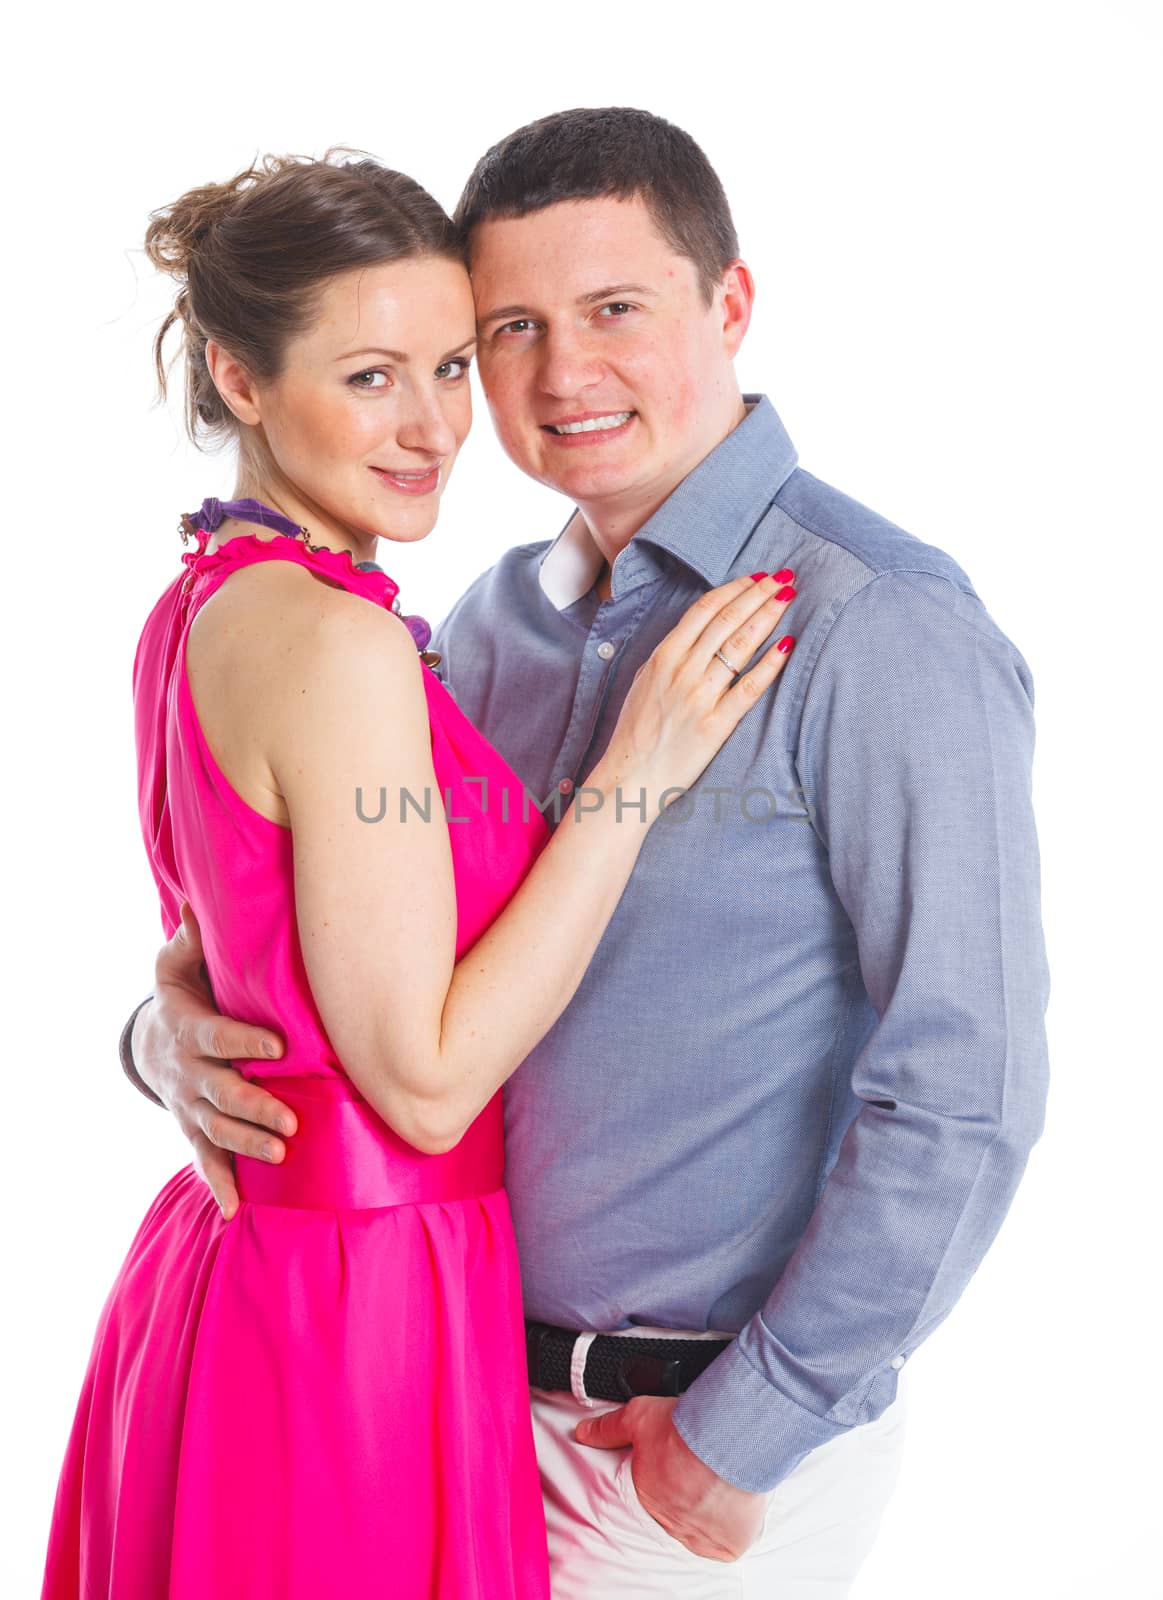 Happy couple. Attractive man and woman being playful. Isolated on white background.